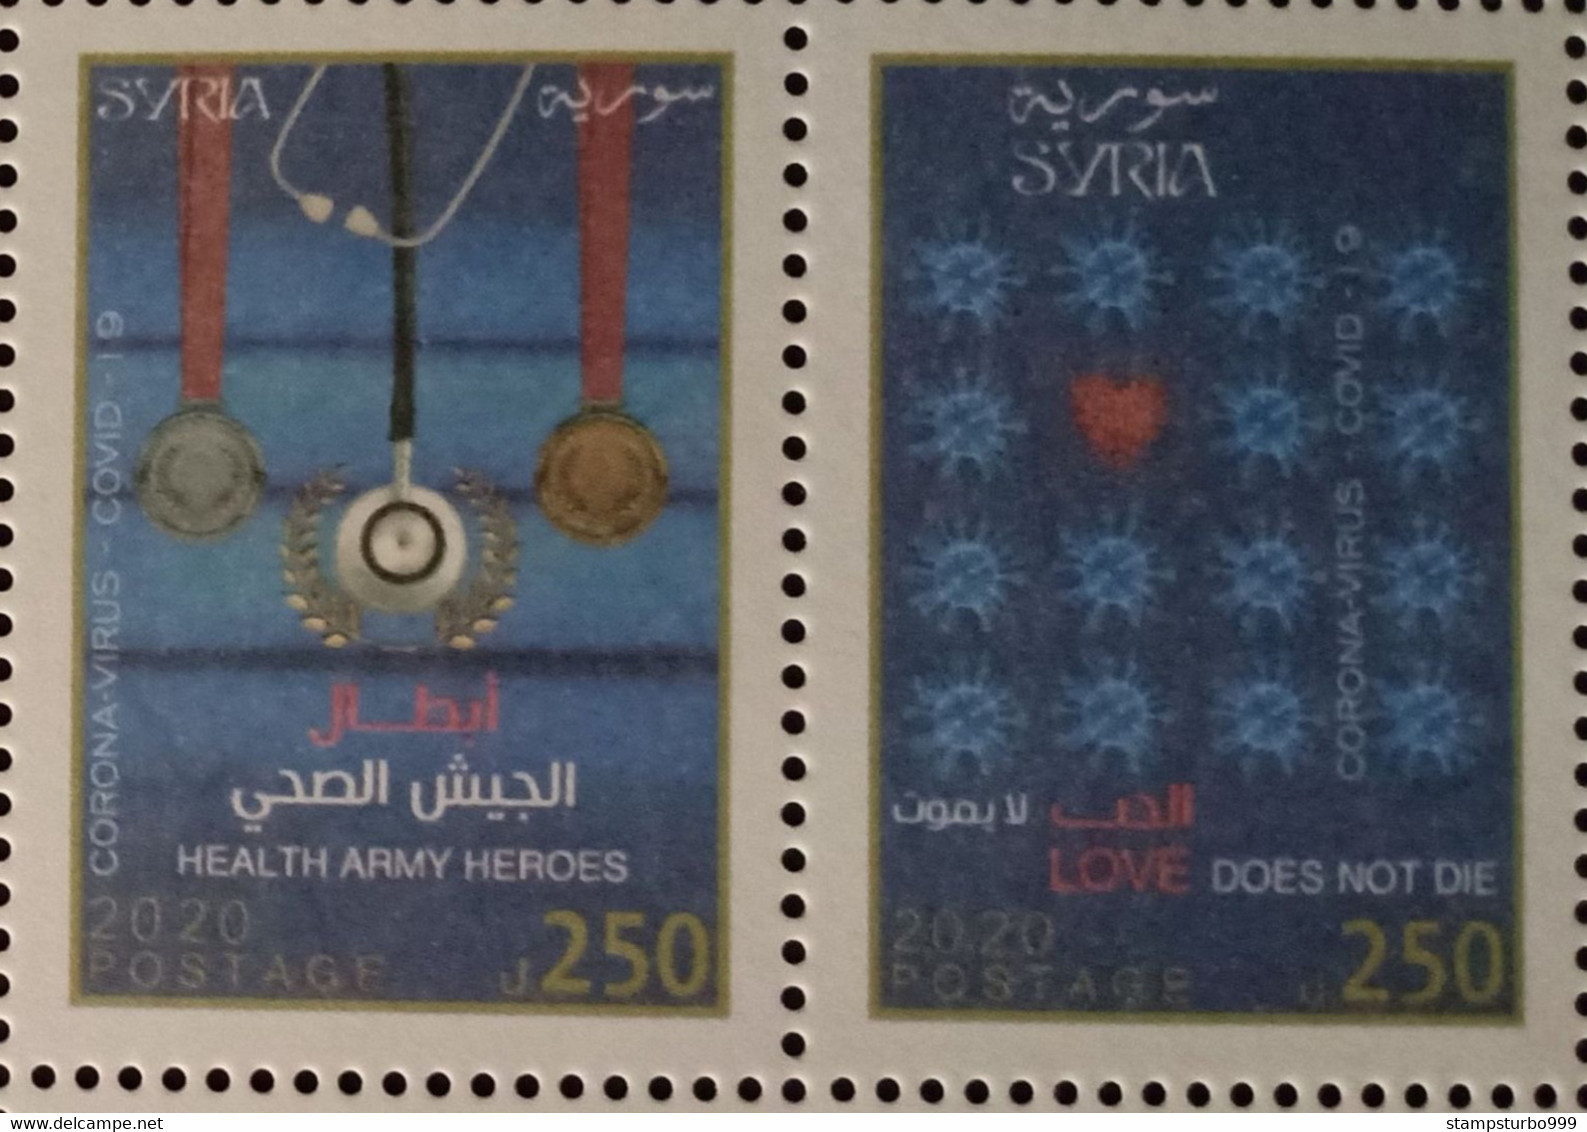 Syrien, Syrie, Syria 2020 Corona Virus (Covid-19)site As Photo, Very Rare Only 5000 Set Issued MNH ** - Neufs